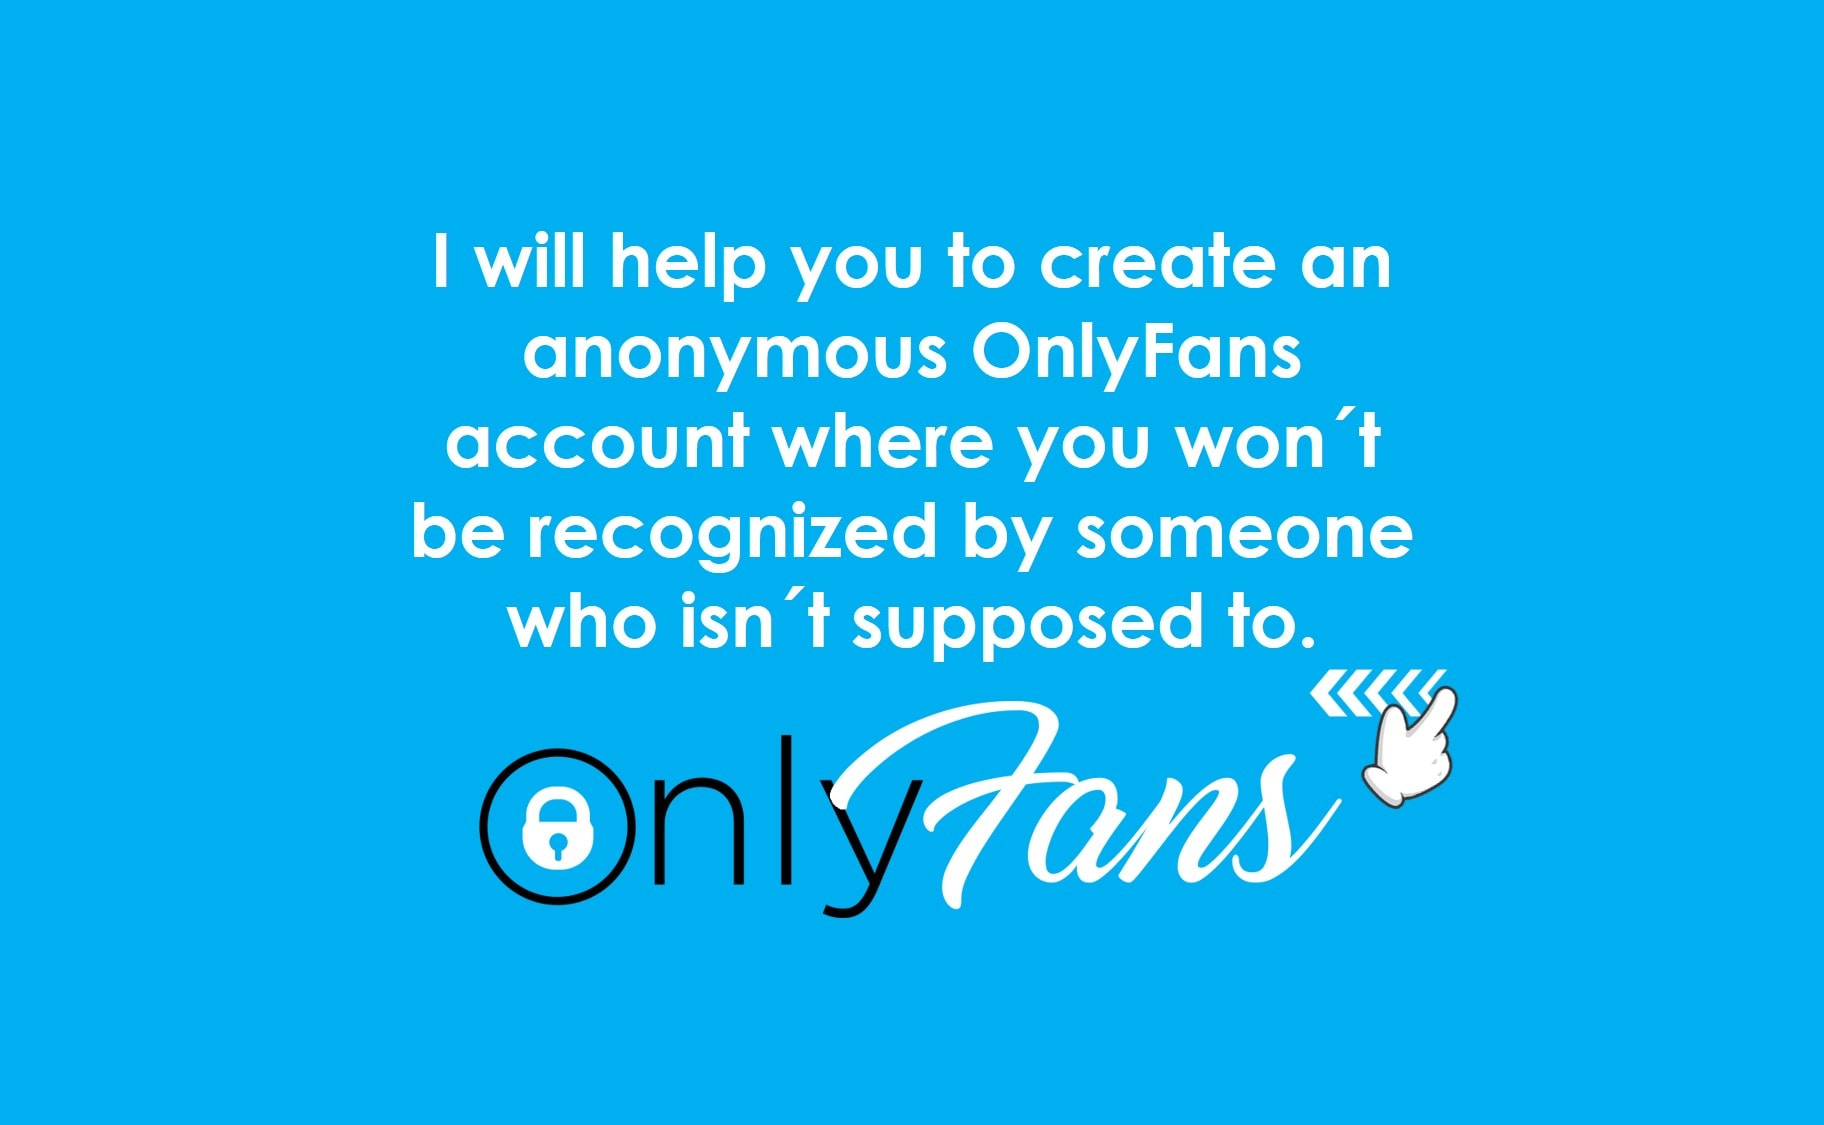 How to make anonymous onlyfans